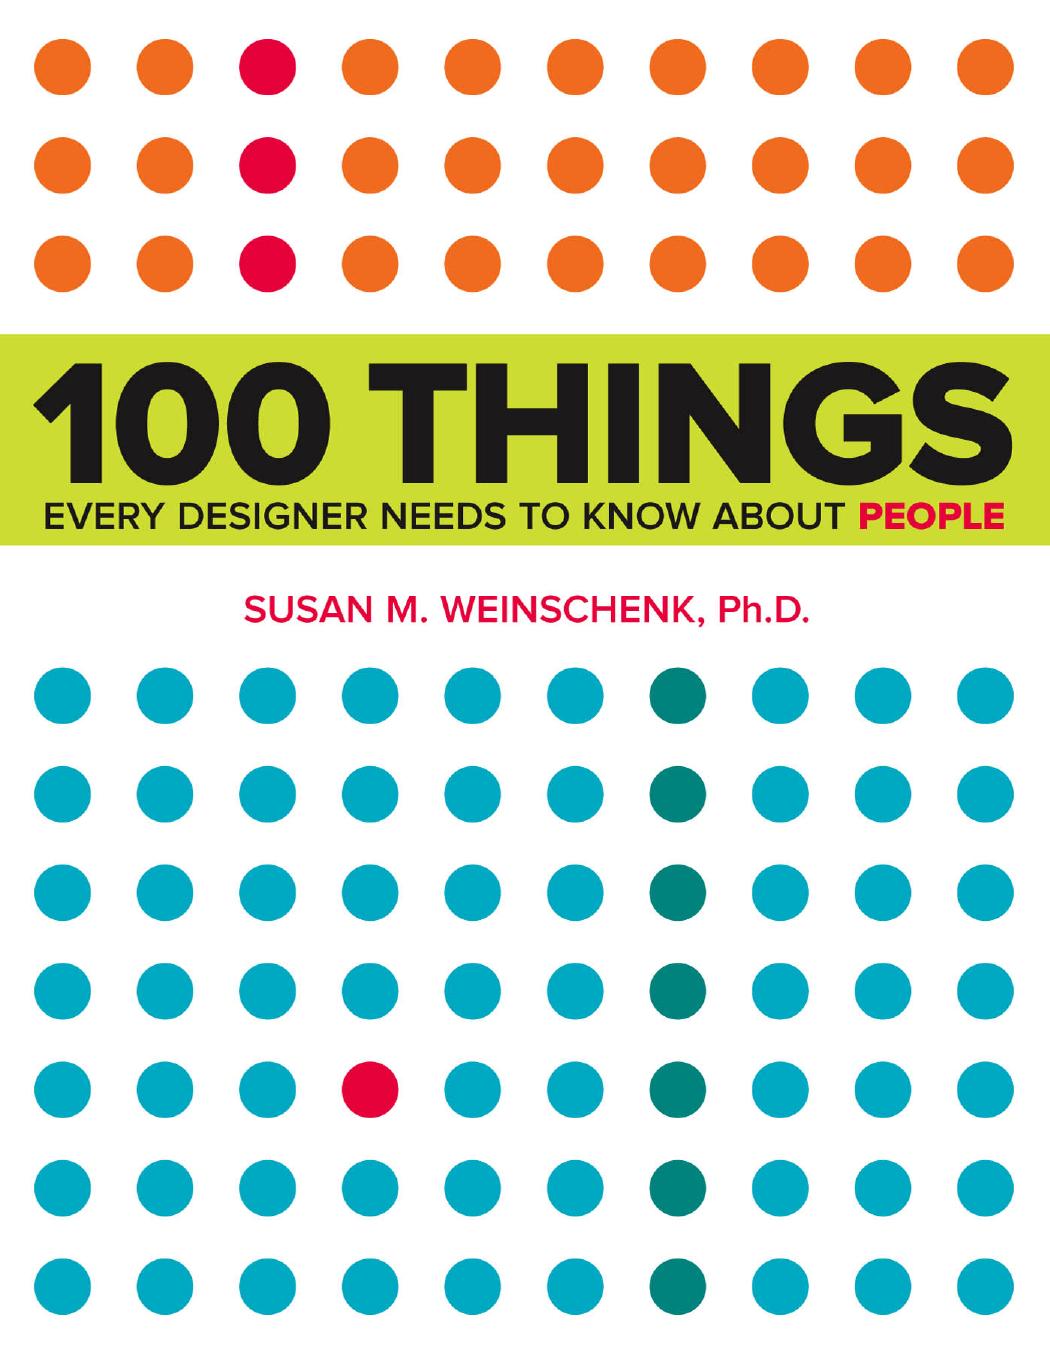 100 Things Every Designer Needs to Know about People What Makes Them Tick.jpg